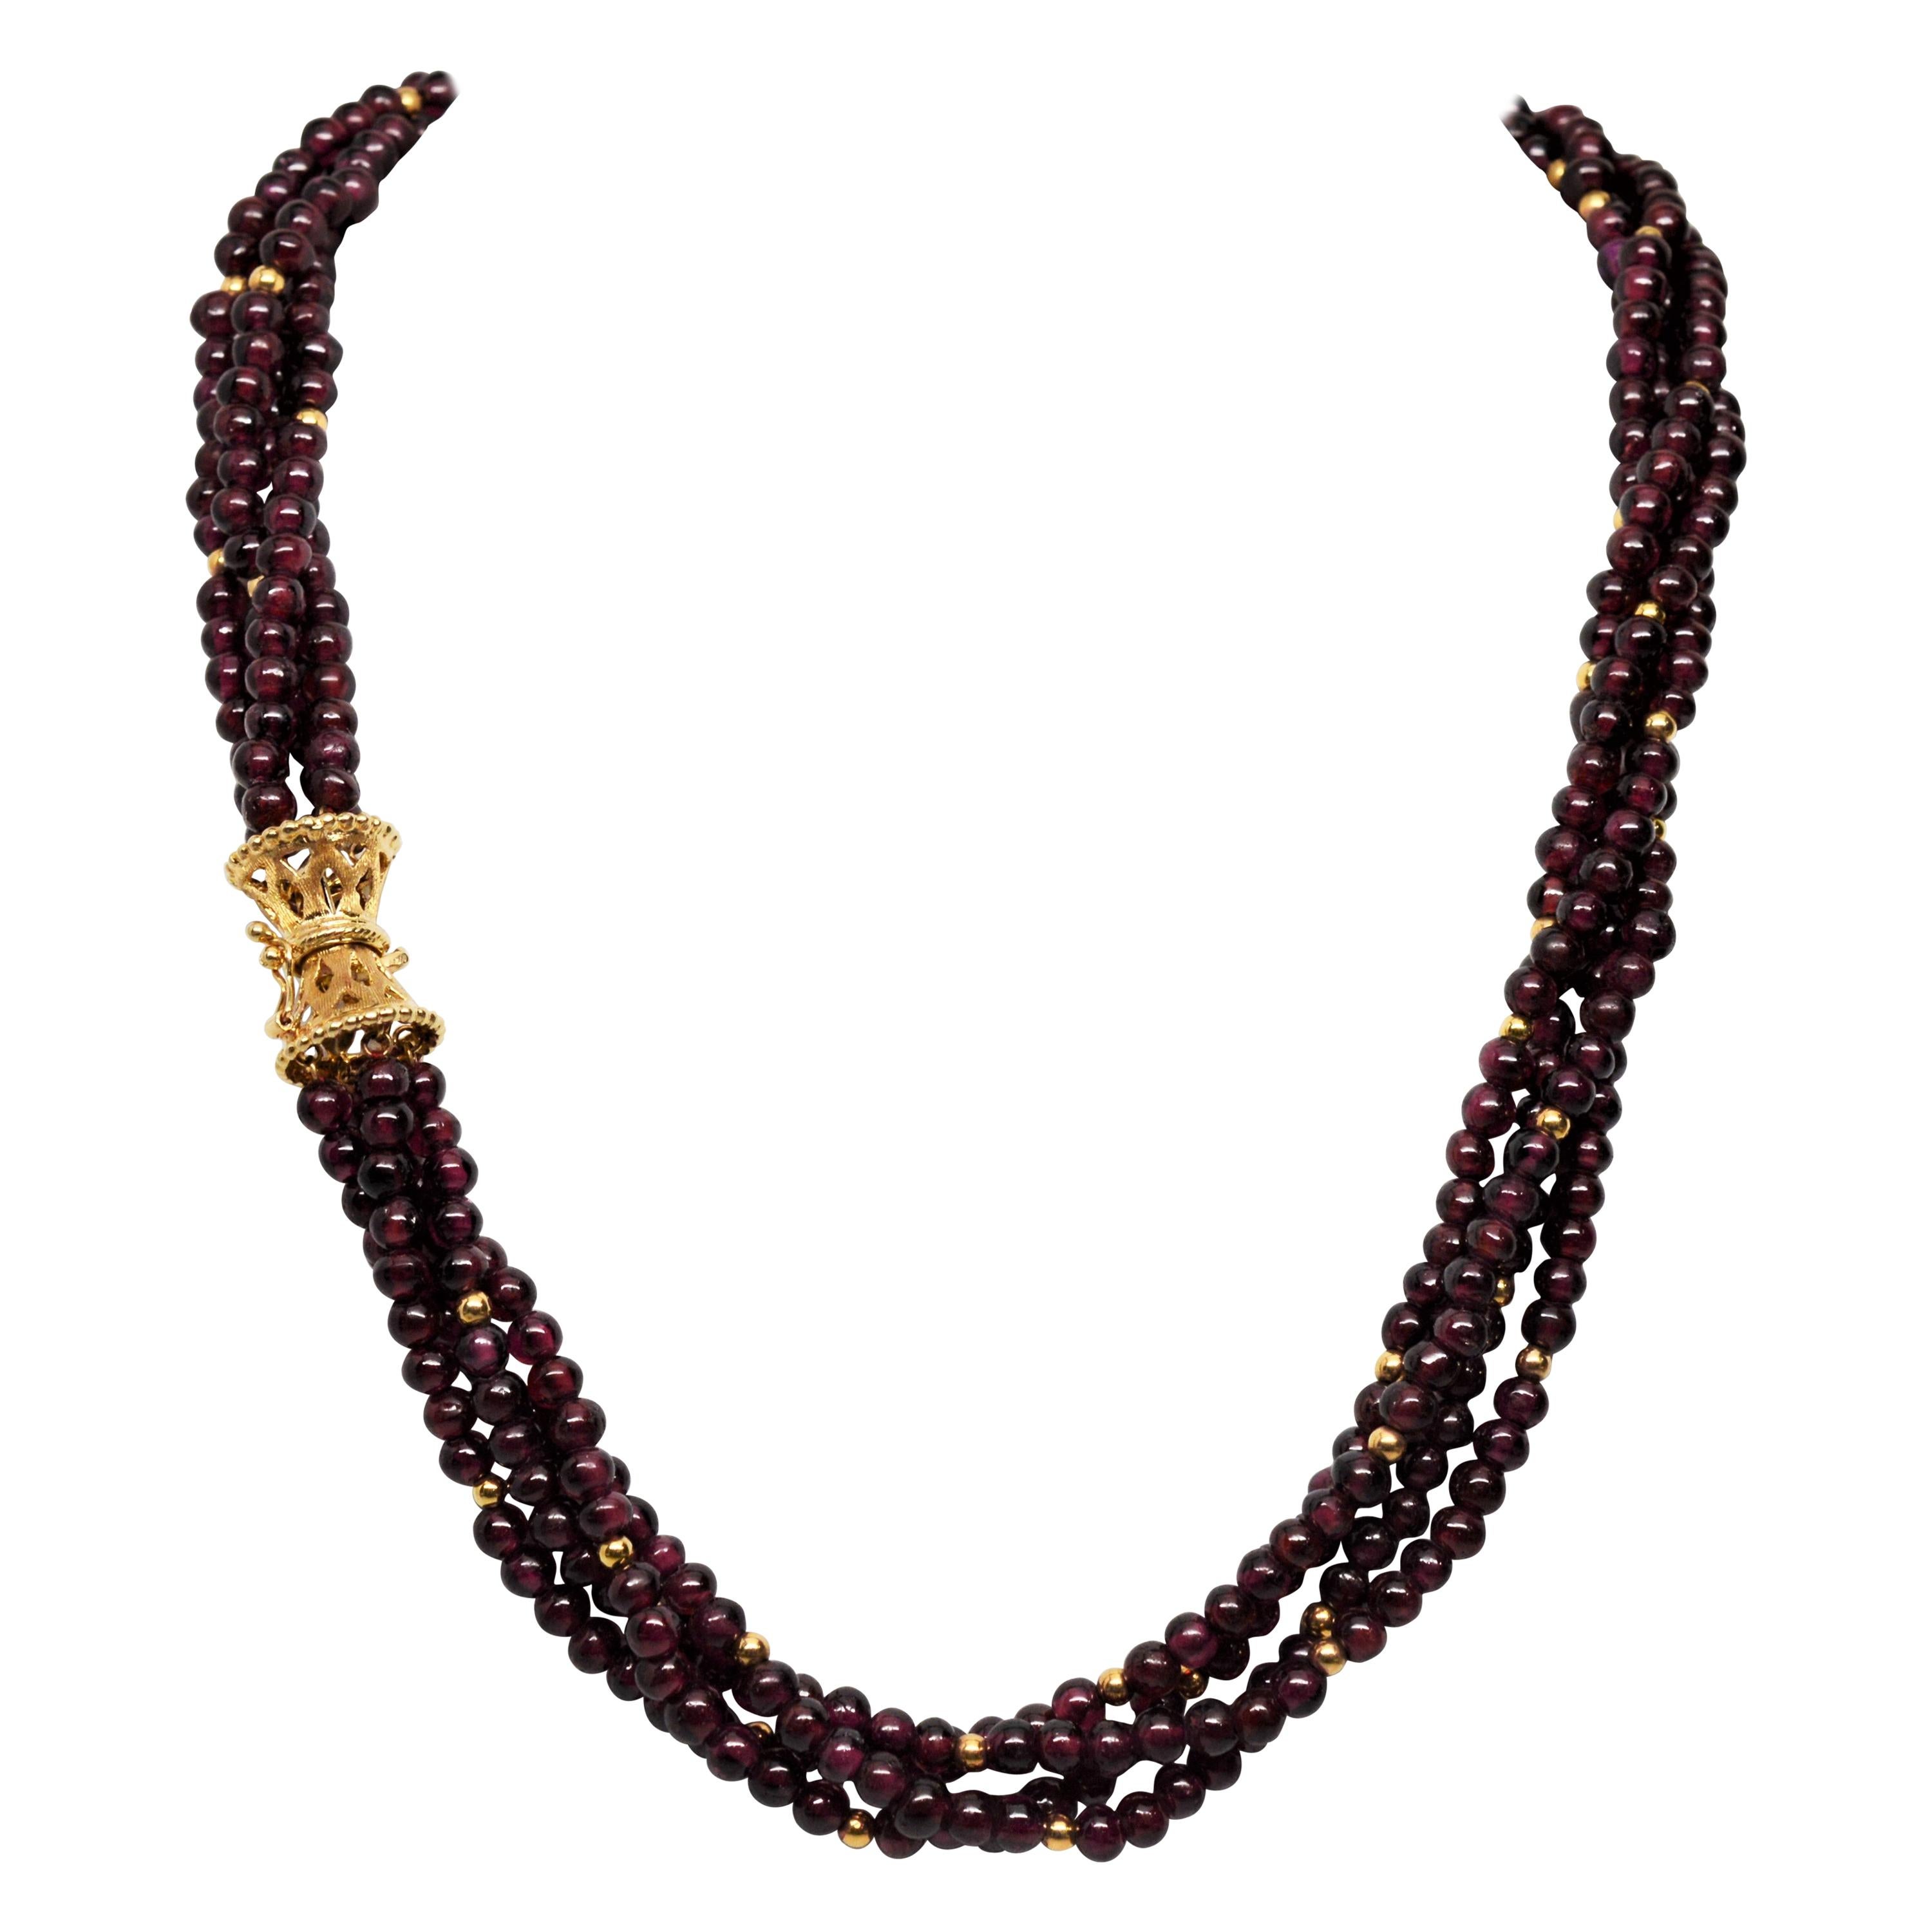 Garnet Bead Multi Strand Necklace with Fancy Yellow Gold Filigree Clasp